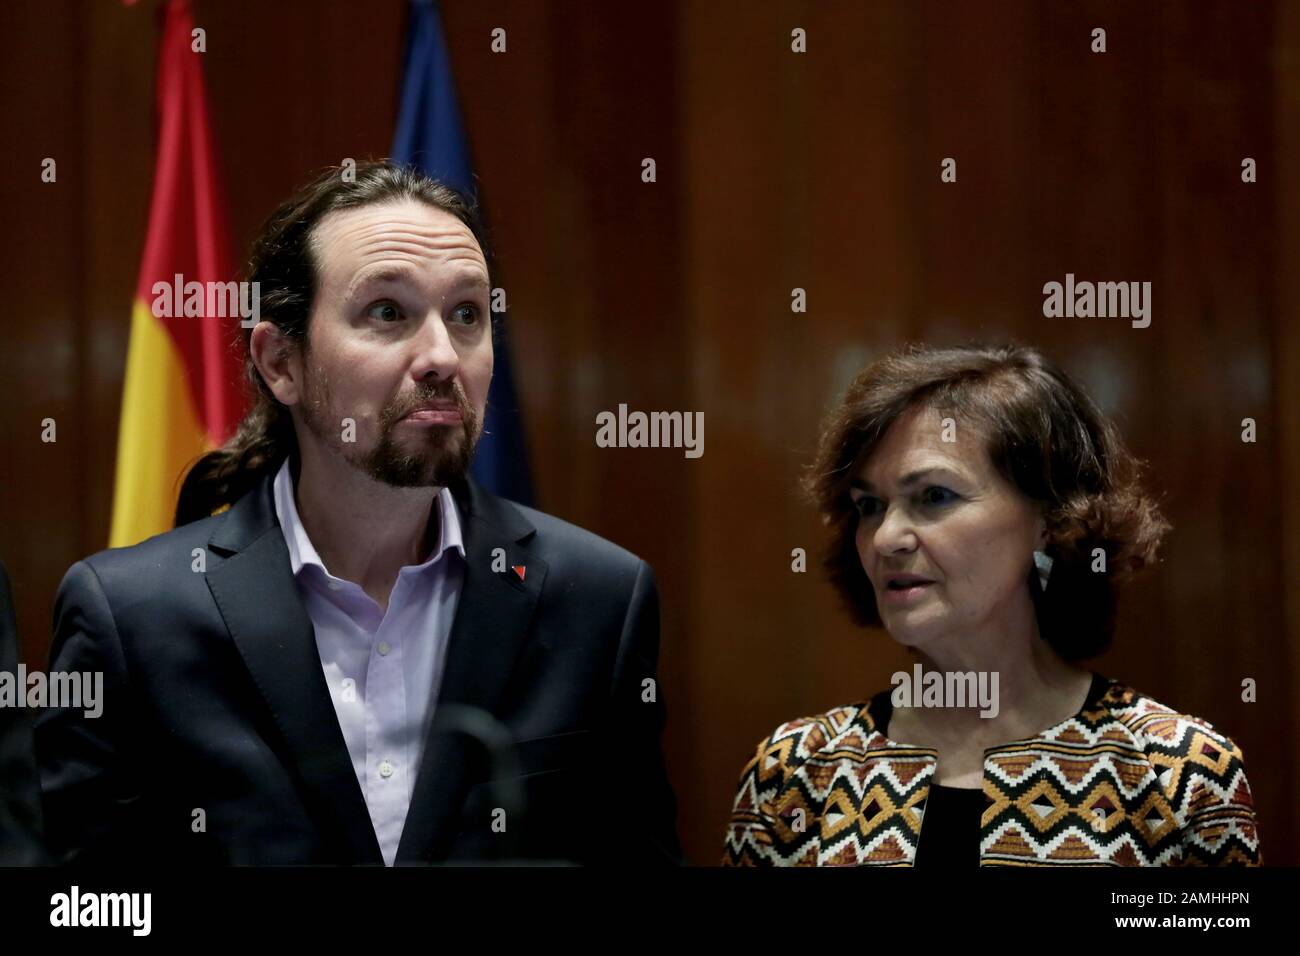 Madrid Spain; 13/01/2020.- Pablo Iglesias (L) second vice president of the spanish governmentand Minister of Social Rights and 2030 Agenda, and Carmen Calvo Minister of the Presidency, Relations with the Courts and Democratic Memory in his inauguration as minister and exchange of Ministerial Portfolios in the headquarters of the ministry of health. Iglesias belongs to the United We Party (Unidas Podemos) and Garzón a United Rigth (Izquierda Unida) that coalition with the President of Spain Pedro Sánchez of the Socialist Workers Party (Psoe)Photo: Juan Carlos Rojas/Picture Alliance | usage wo Stock Photo